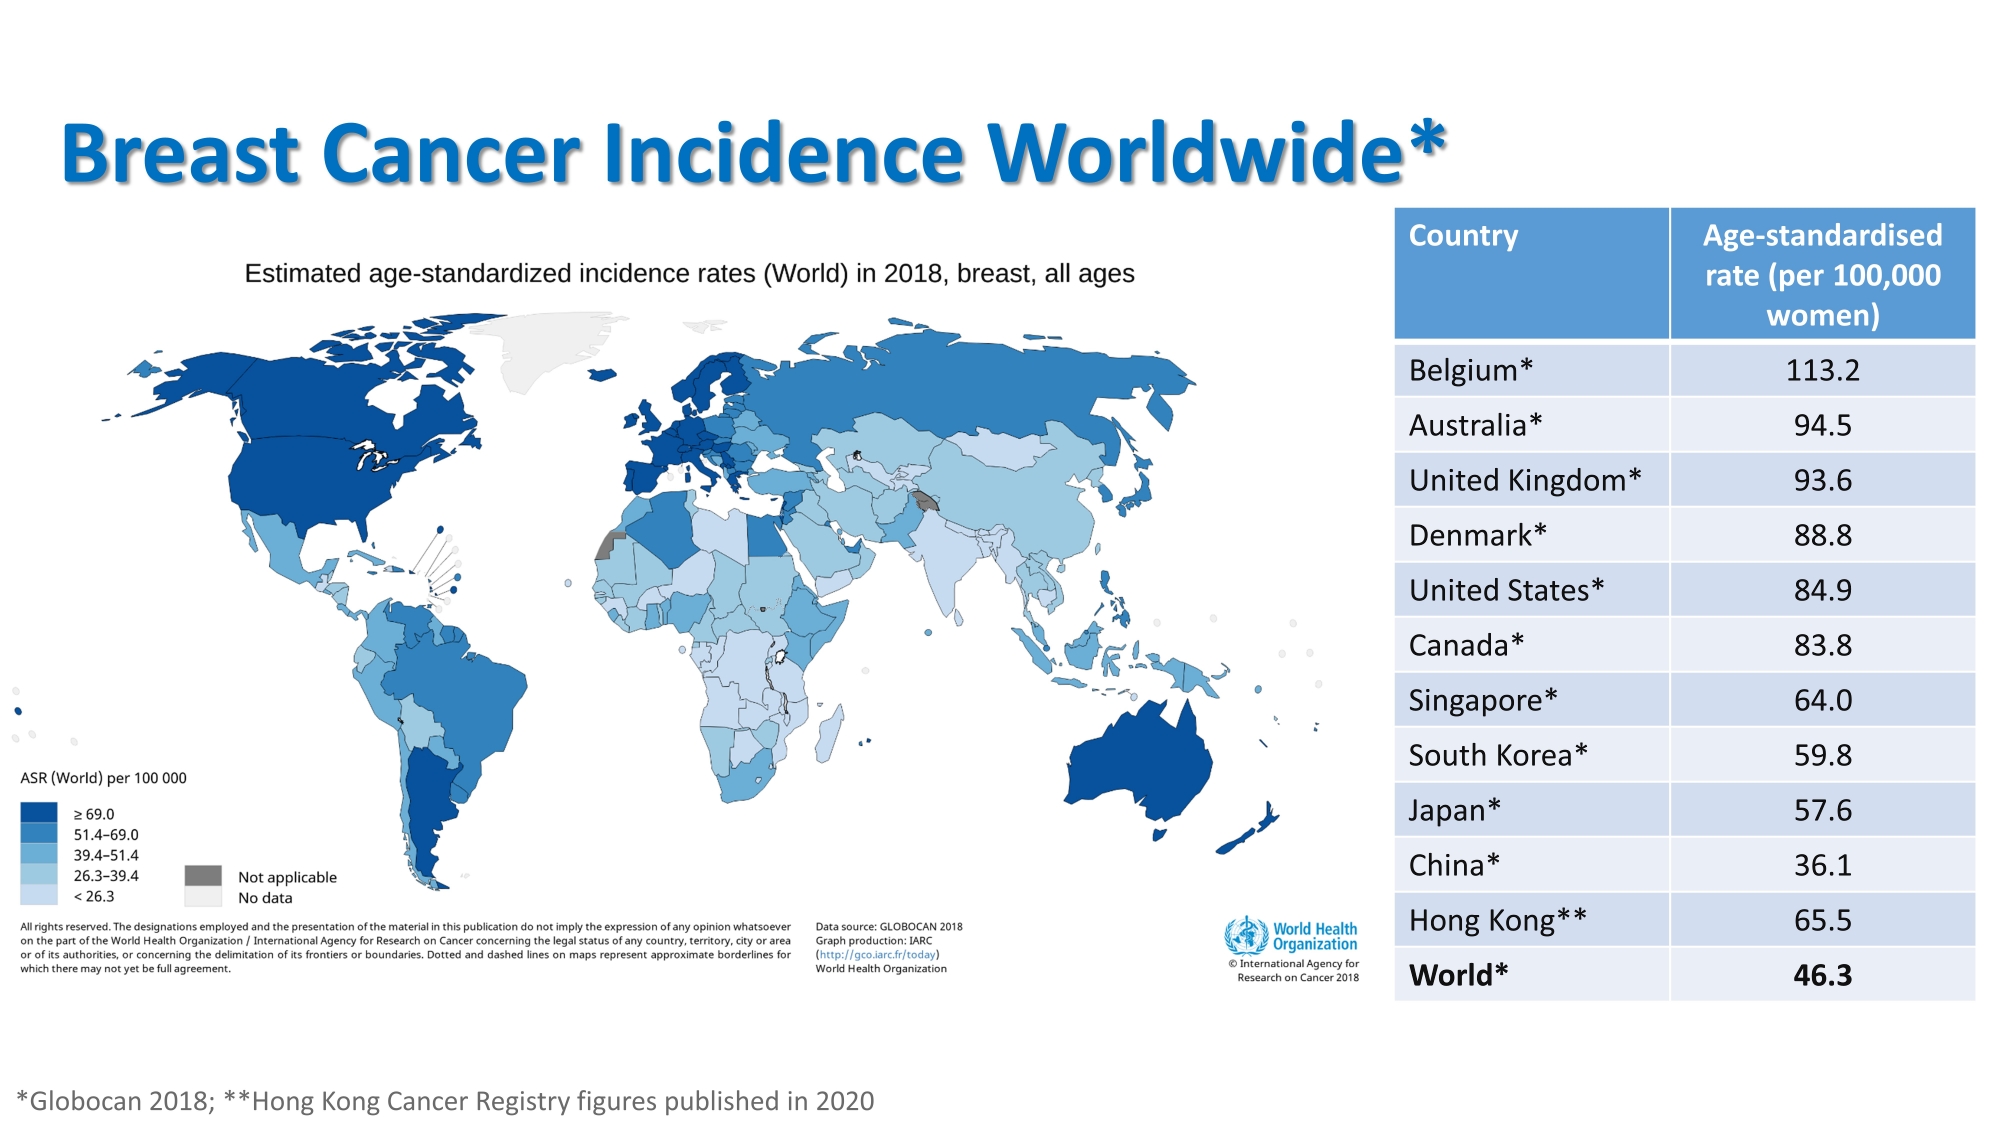 Self Photos / Files - 05. Breast Cancer Incidence Worldwide